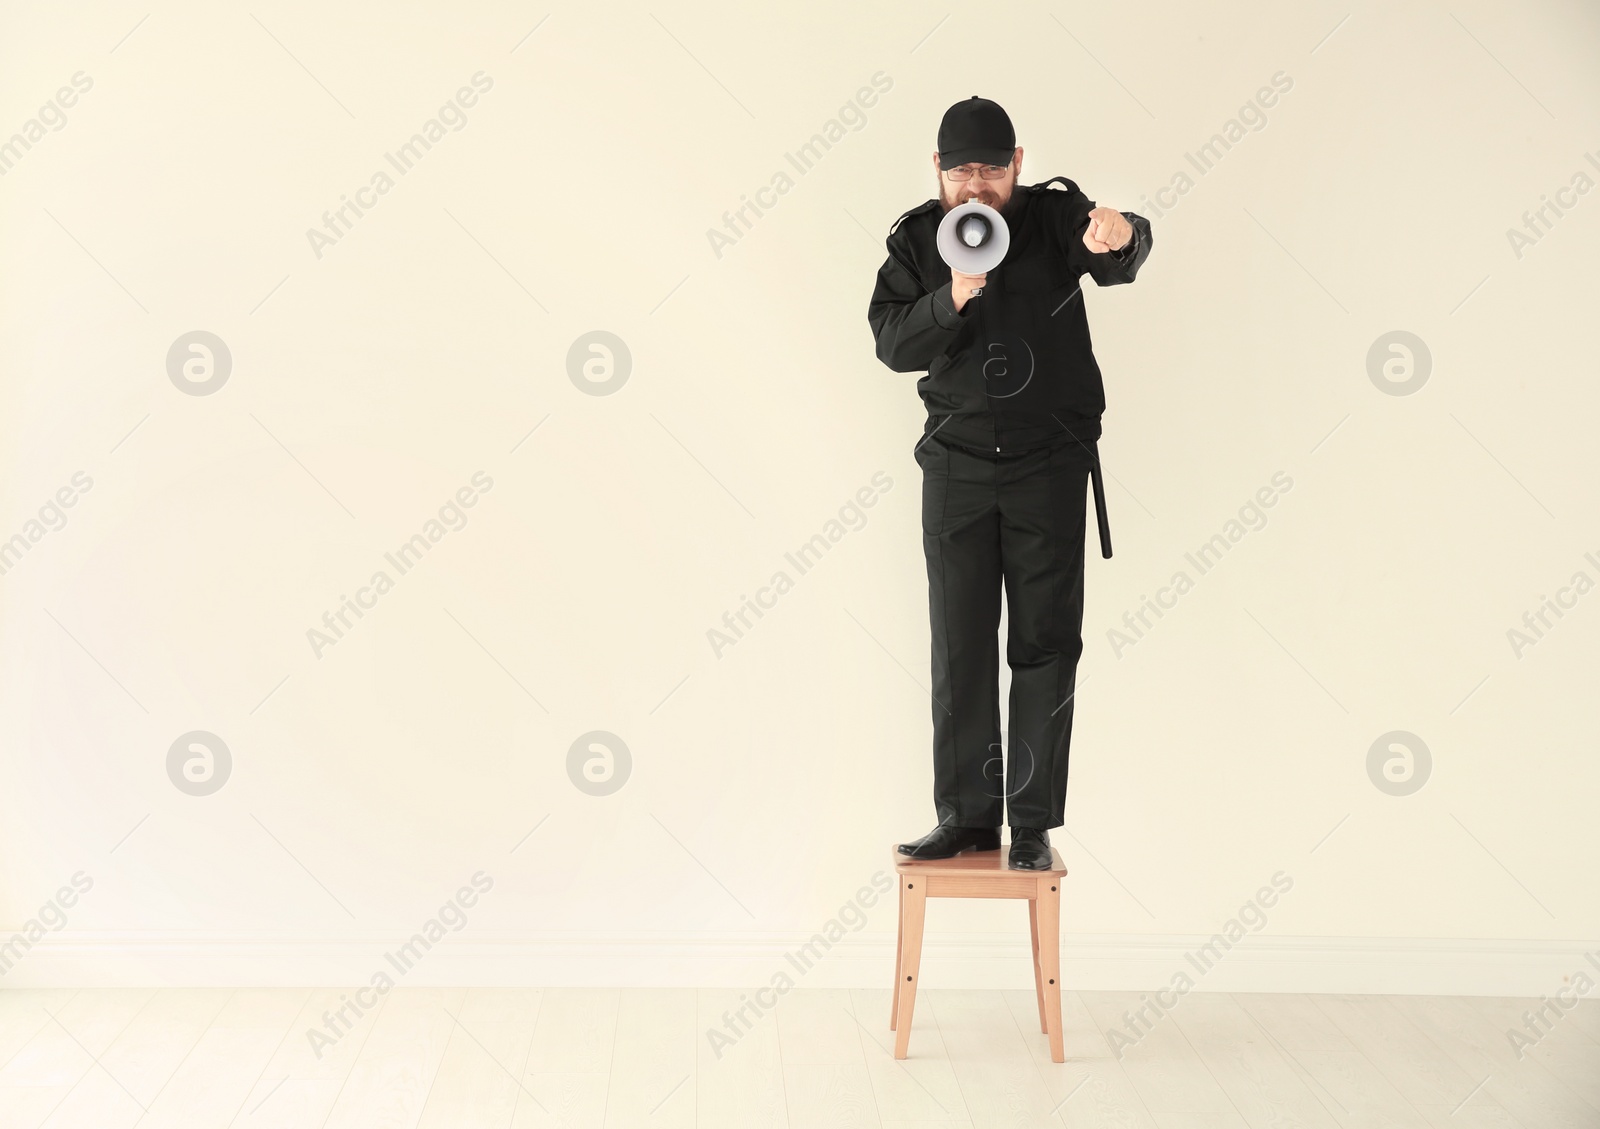 Photo of Security guard shouting into megaphone indoors